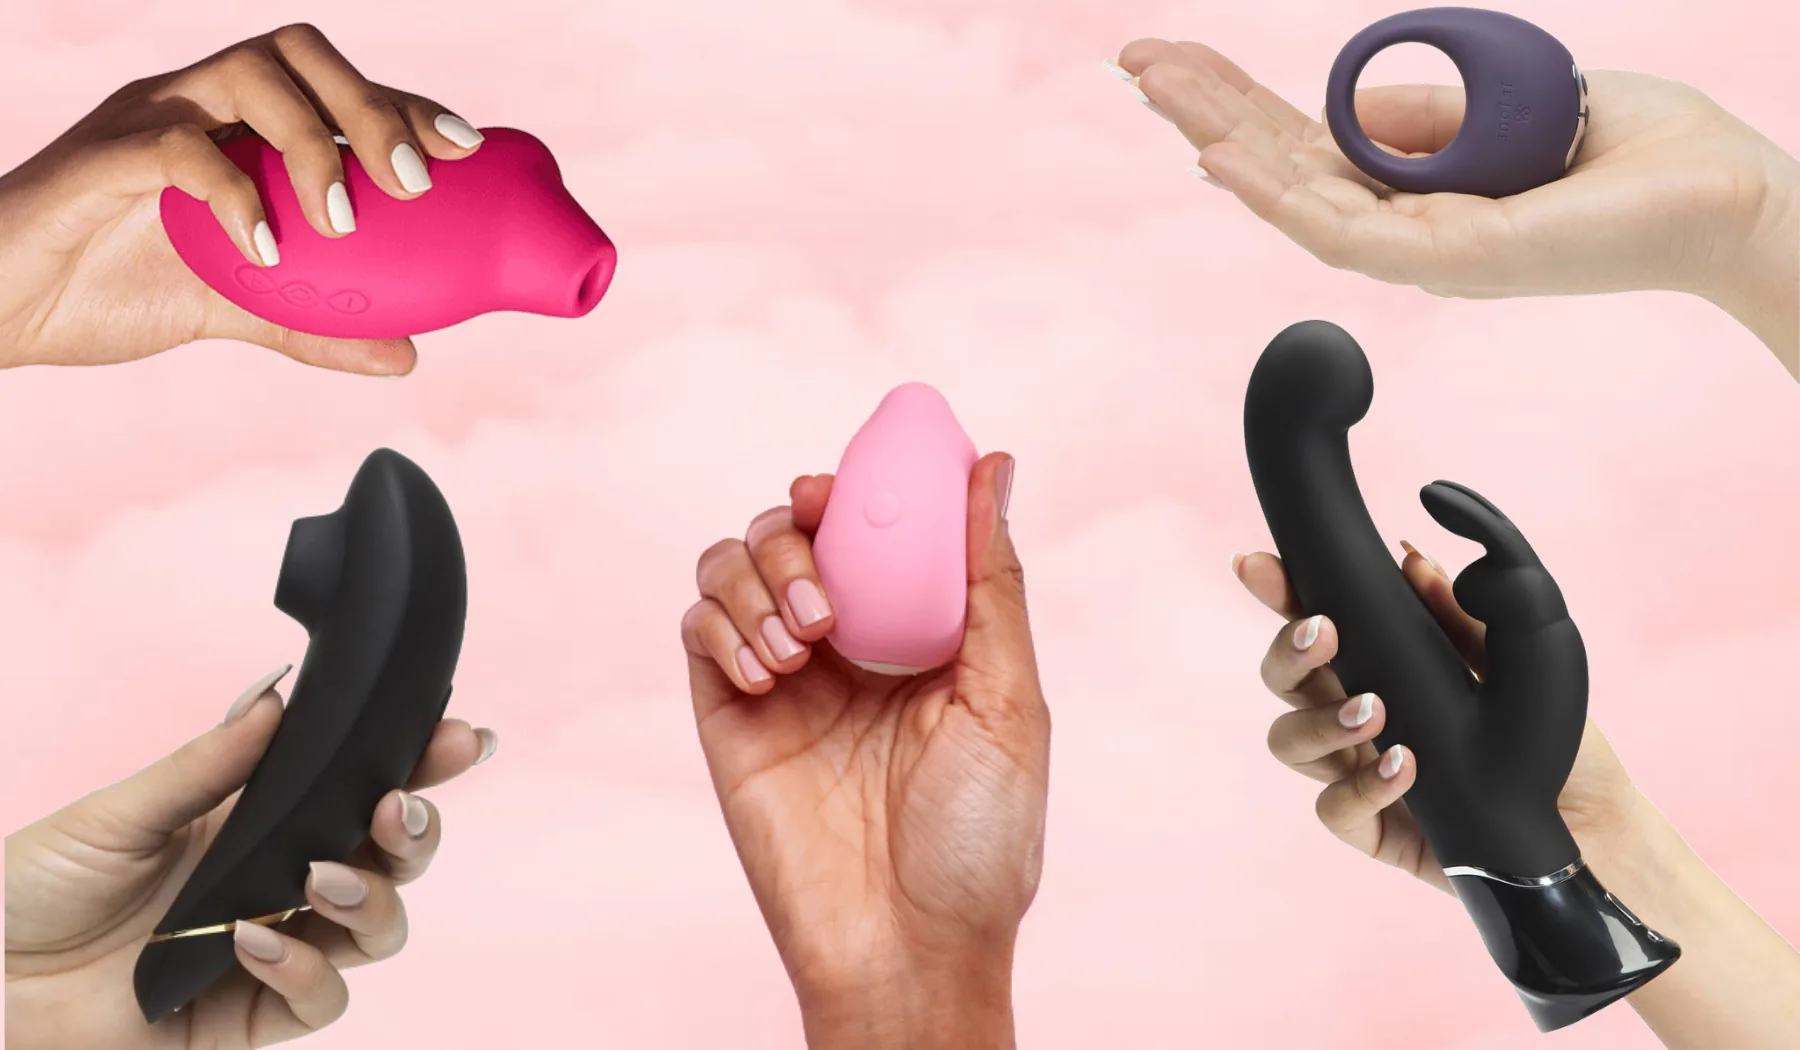 Ben Wa Balls – Learn Everything You Need To Know About These Woman’s Sex Toy